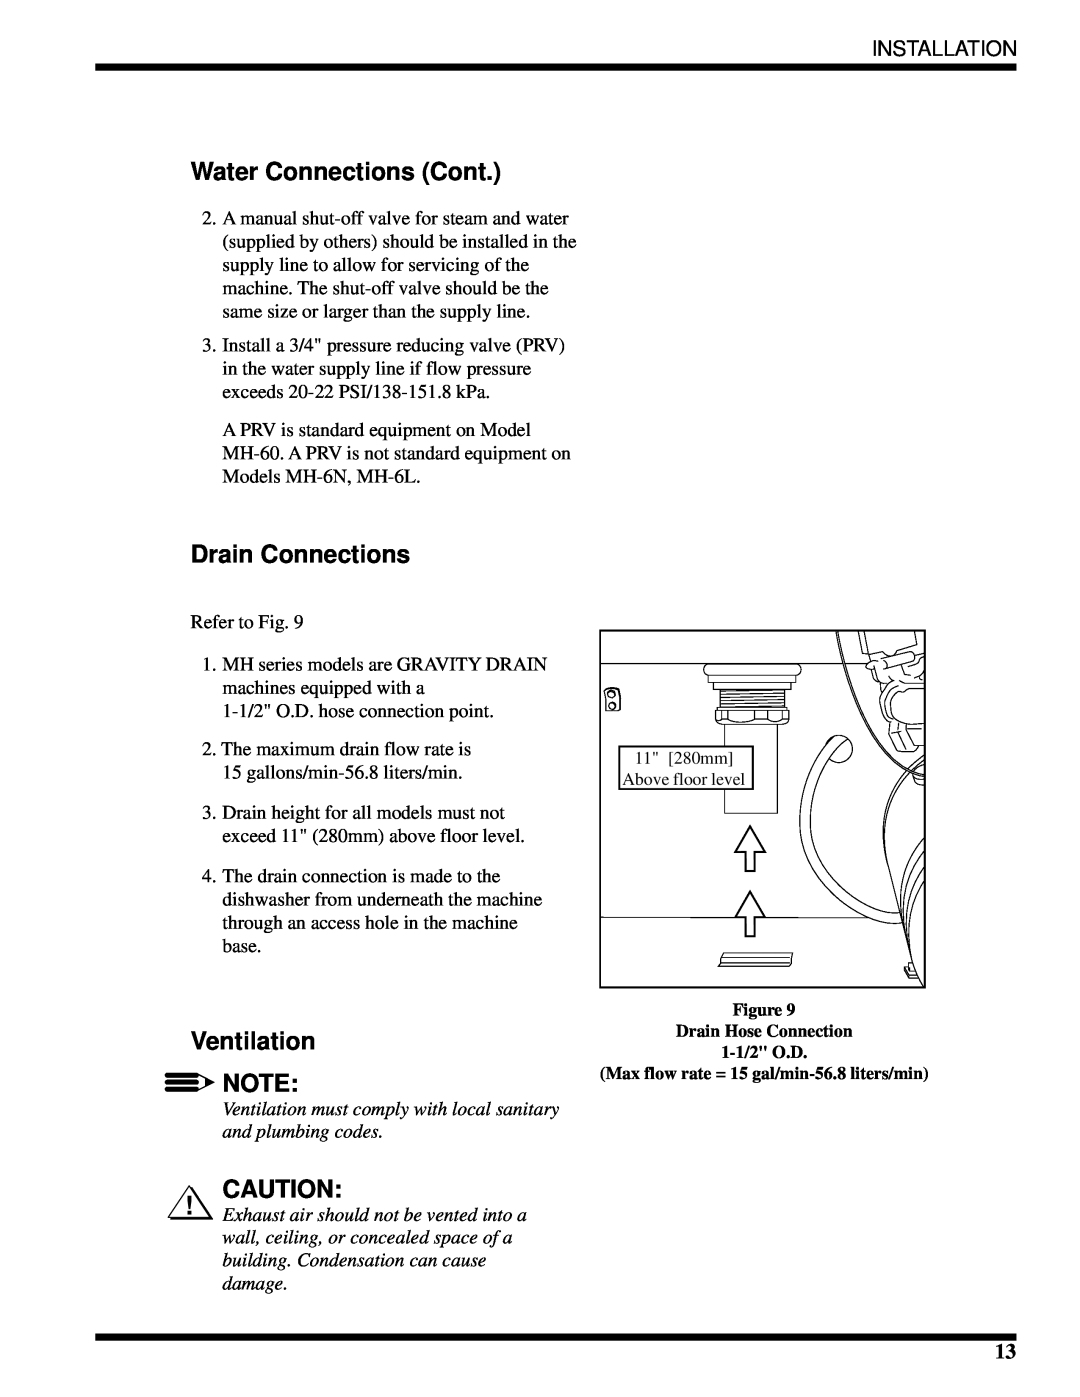 Moyer Diebel MH-6NM3, MH-6LM3, MH-60M3 technical manual Water Connections Cont, Drain Connections, Ventilation, Installation 